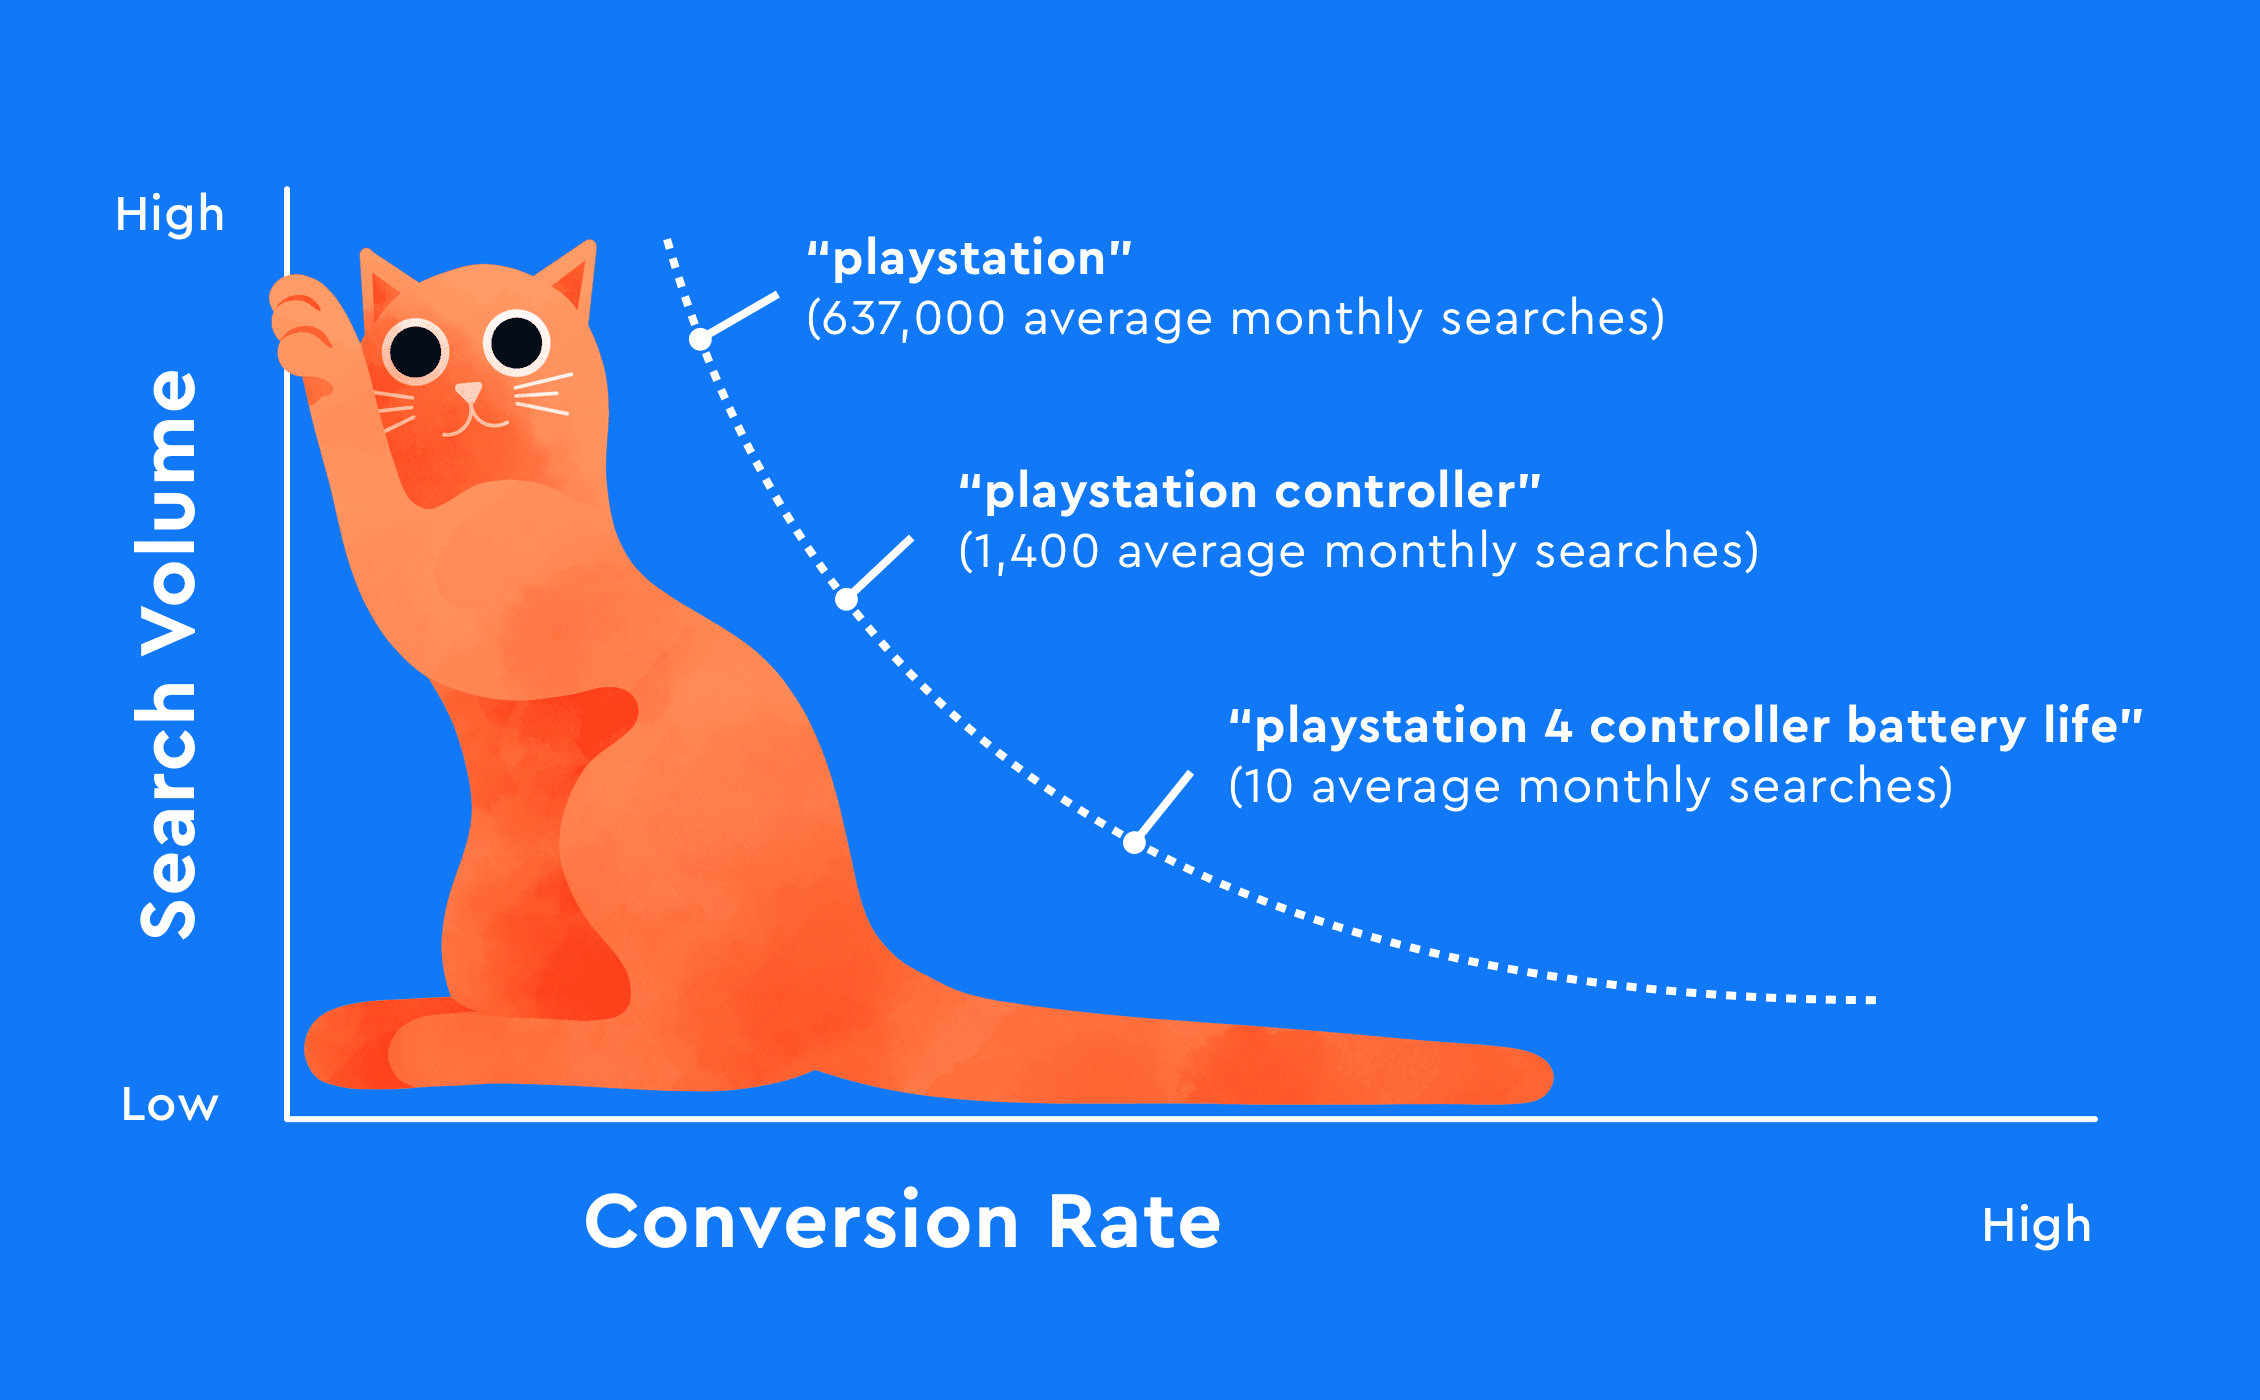 Correlation of keyword search volume and conversion rate